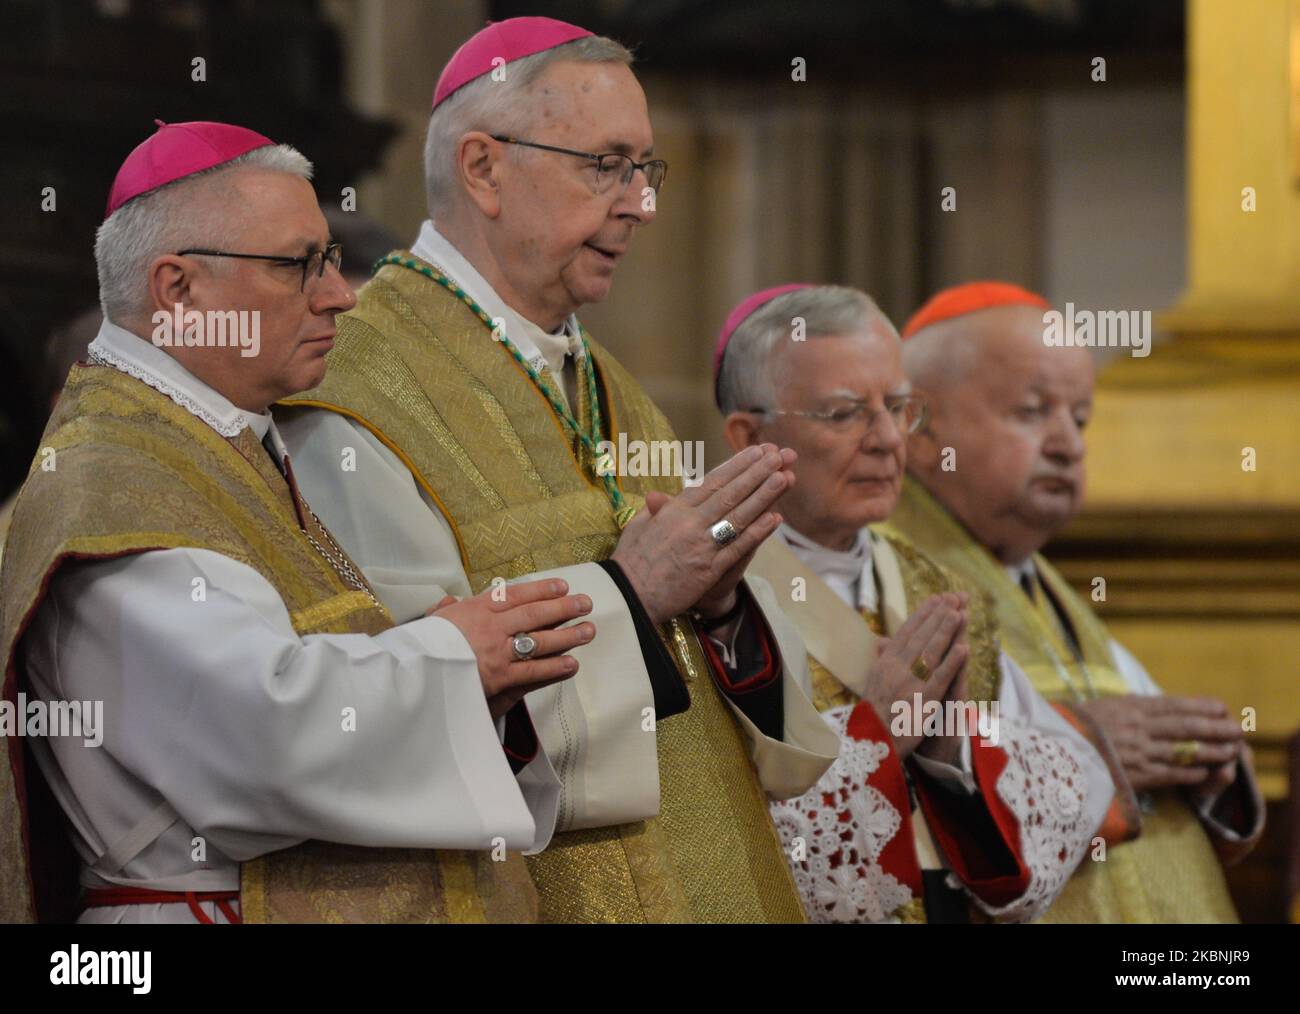 (L-R) Bishop Artur G. Mizinski, Archbishop Stanislaw Gadecki, Archbishop Marek Jedraszewski and Cardinal Stanislaw Dziwisz, during the Holy Mass led by Waclaw Depo, Archbishop of Czestochowa, on the occasion of the feast of Saint Stanislaus, bishop and martyr, the main patron of Poland, with the participation of the Polish Episcopate. On Sunday, May 10, 2020, in Wawel Cathedral, Krakow, Poland. (Photo by Artur Widak/NurPhoto) Stock Photo